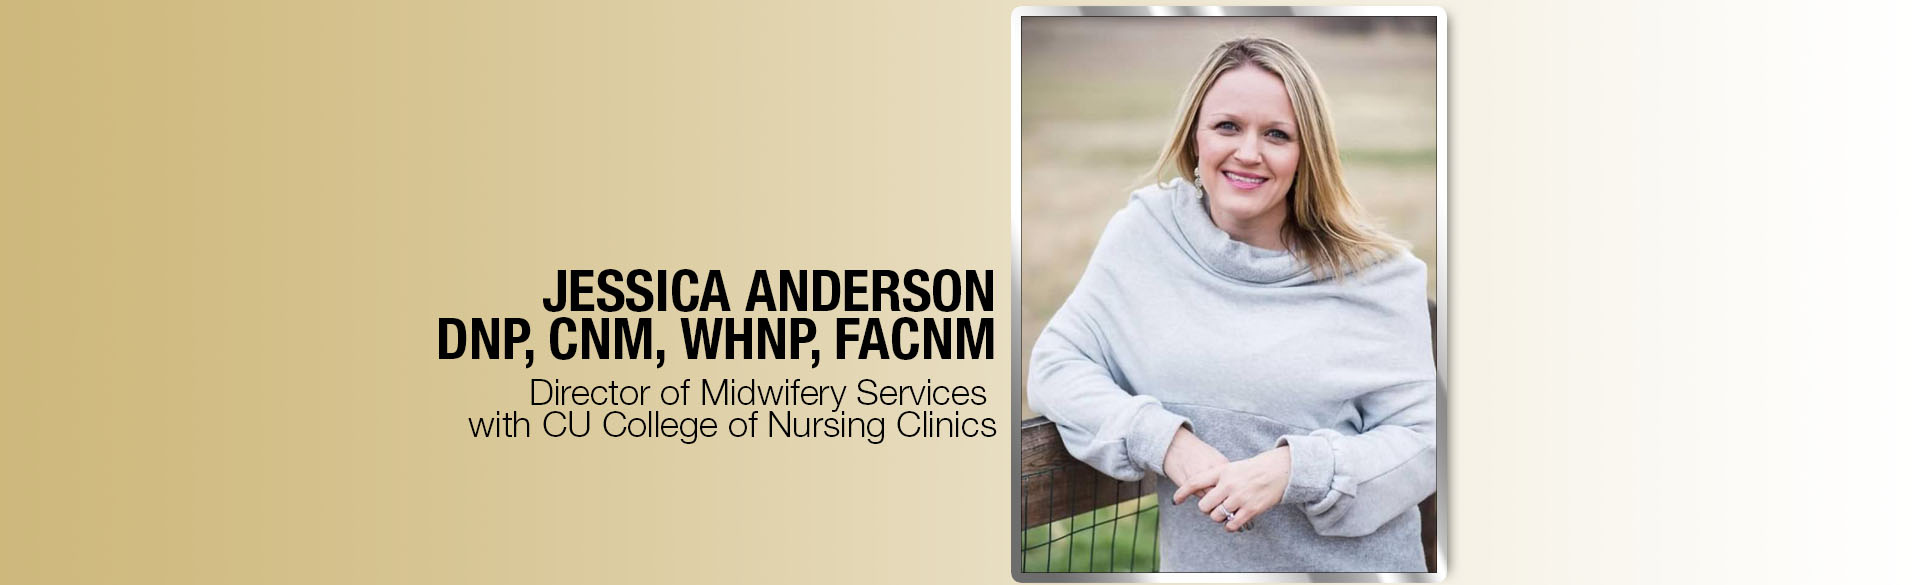 Jessica Anderson - Director of Midwifery Services with CU College of Nursing clinics